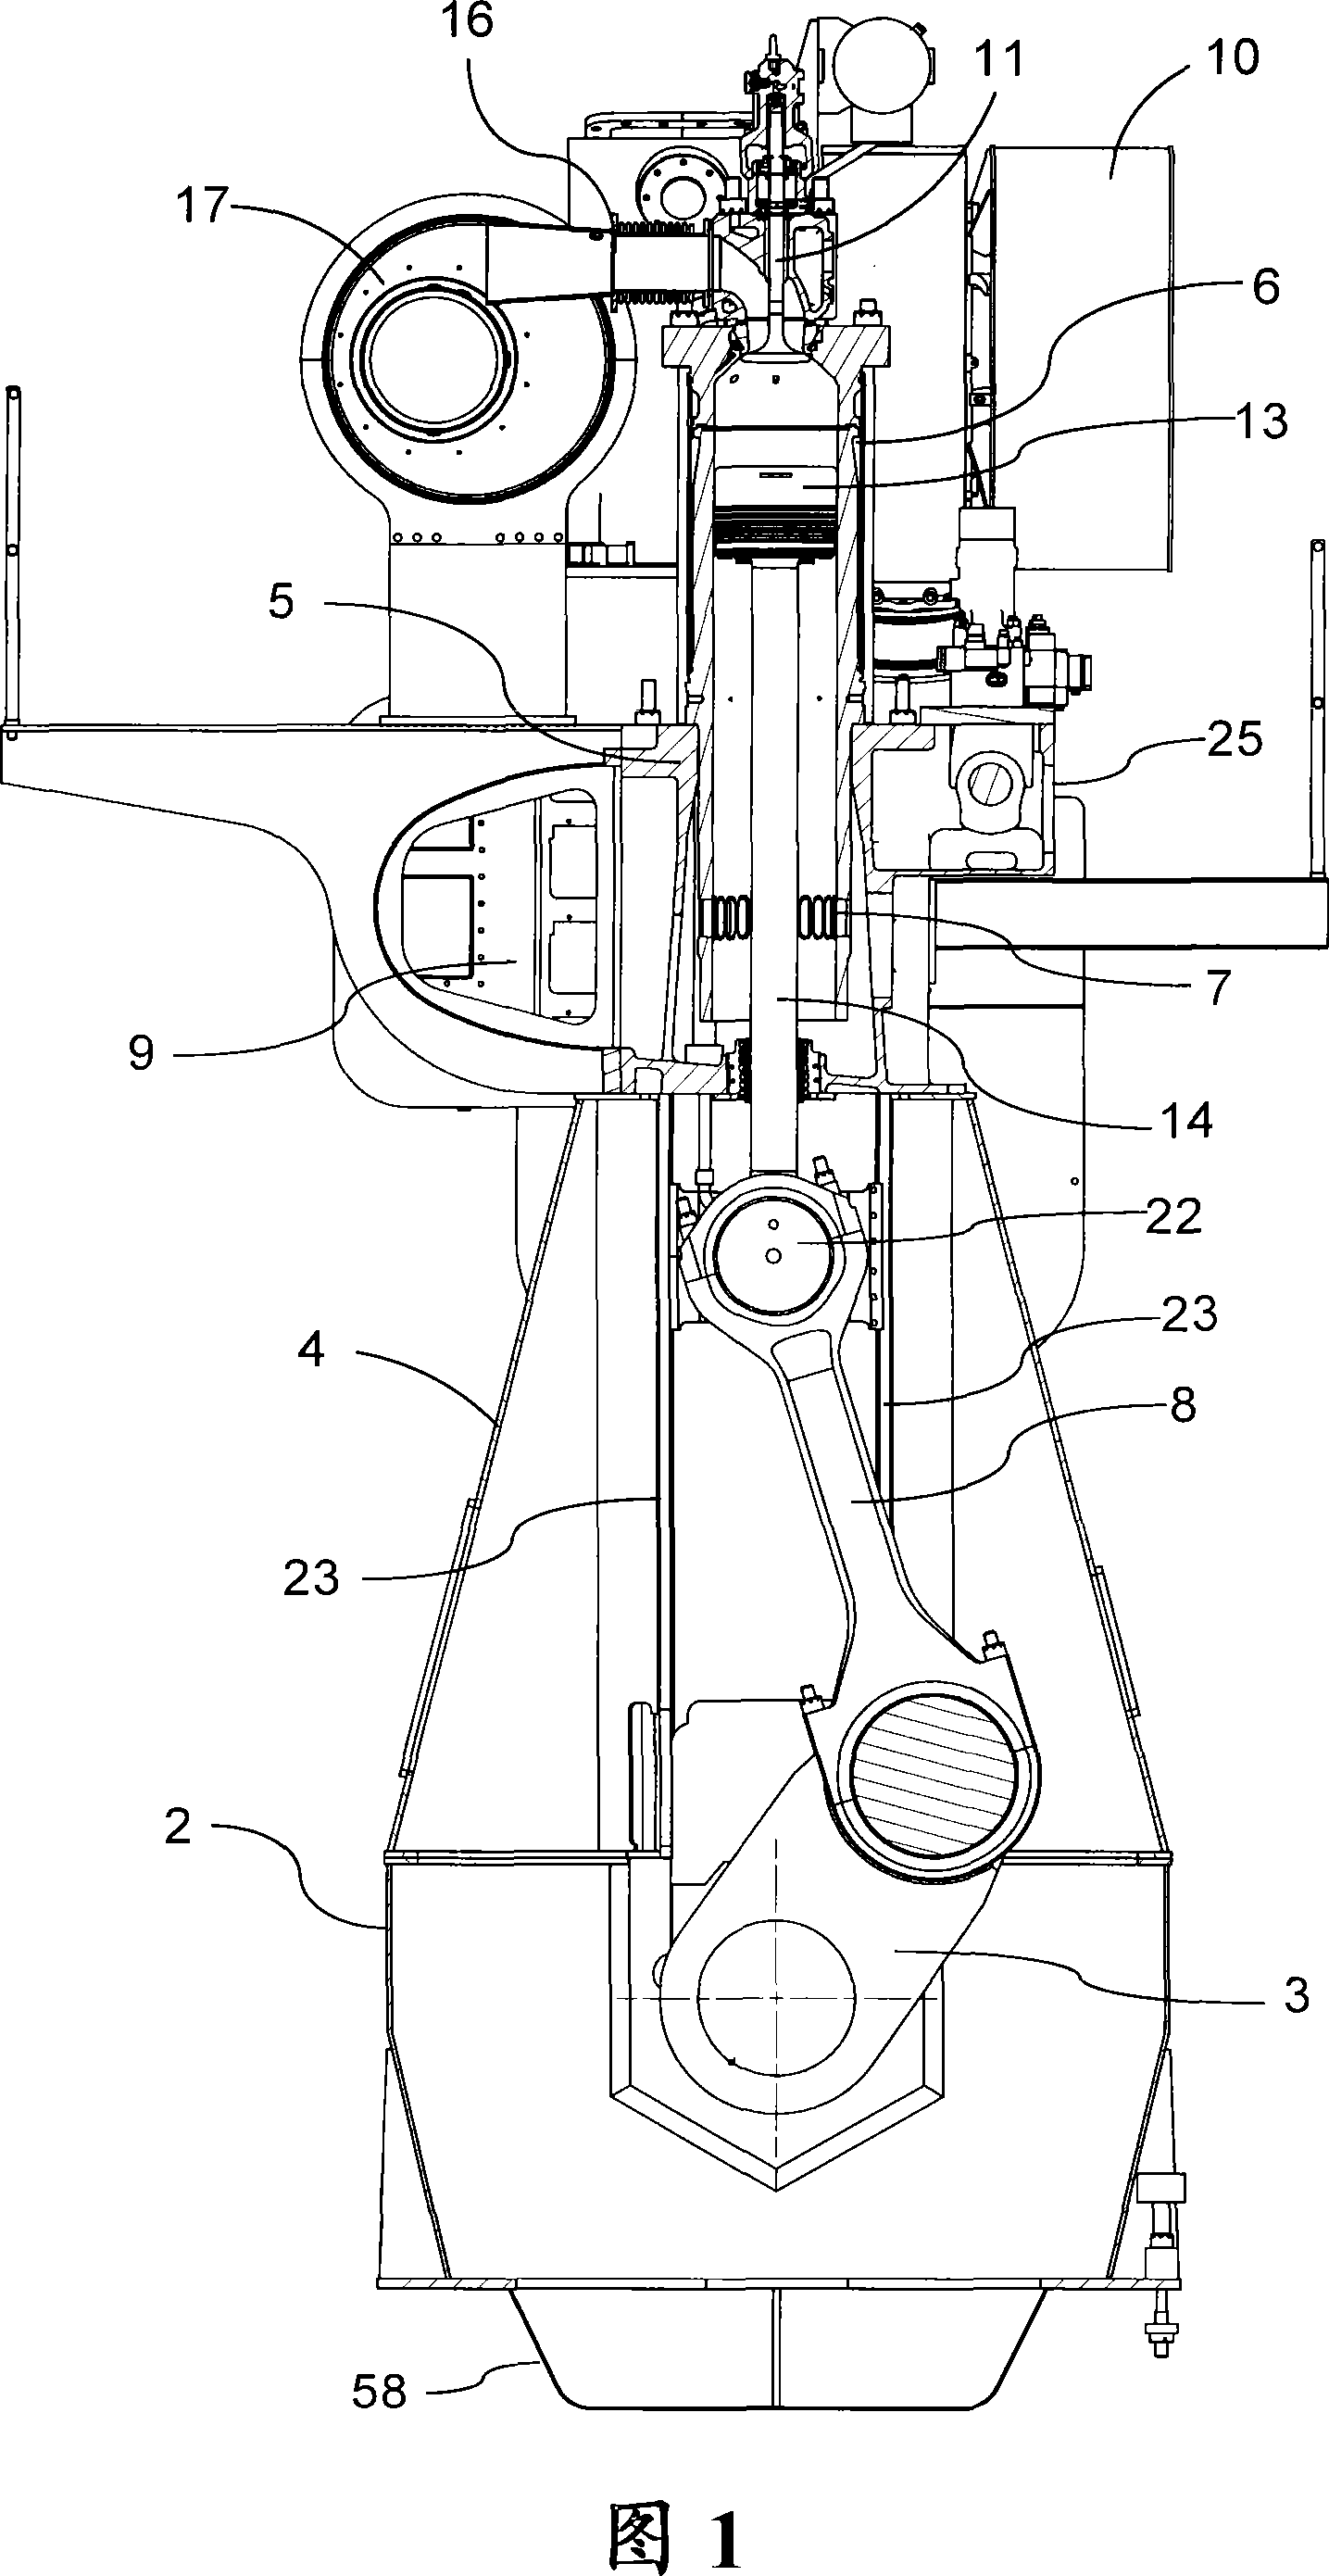 Main bearing support for a large two-stroke diesel engine